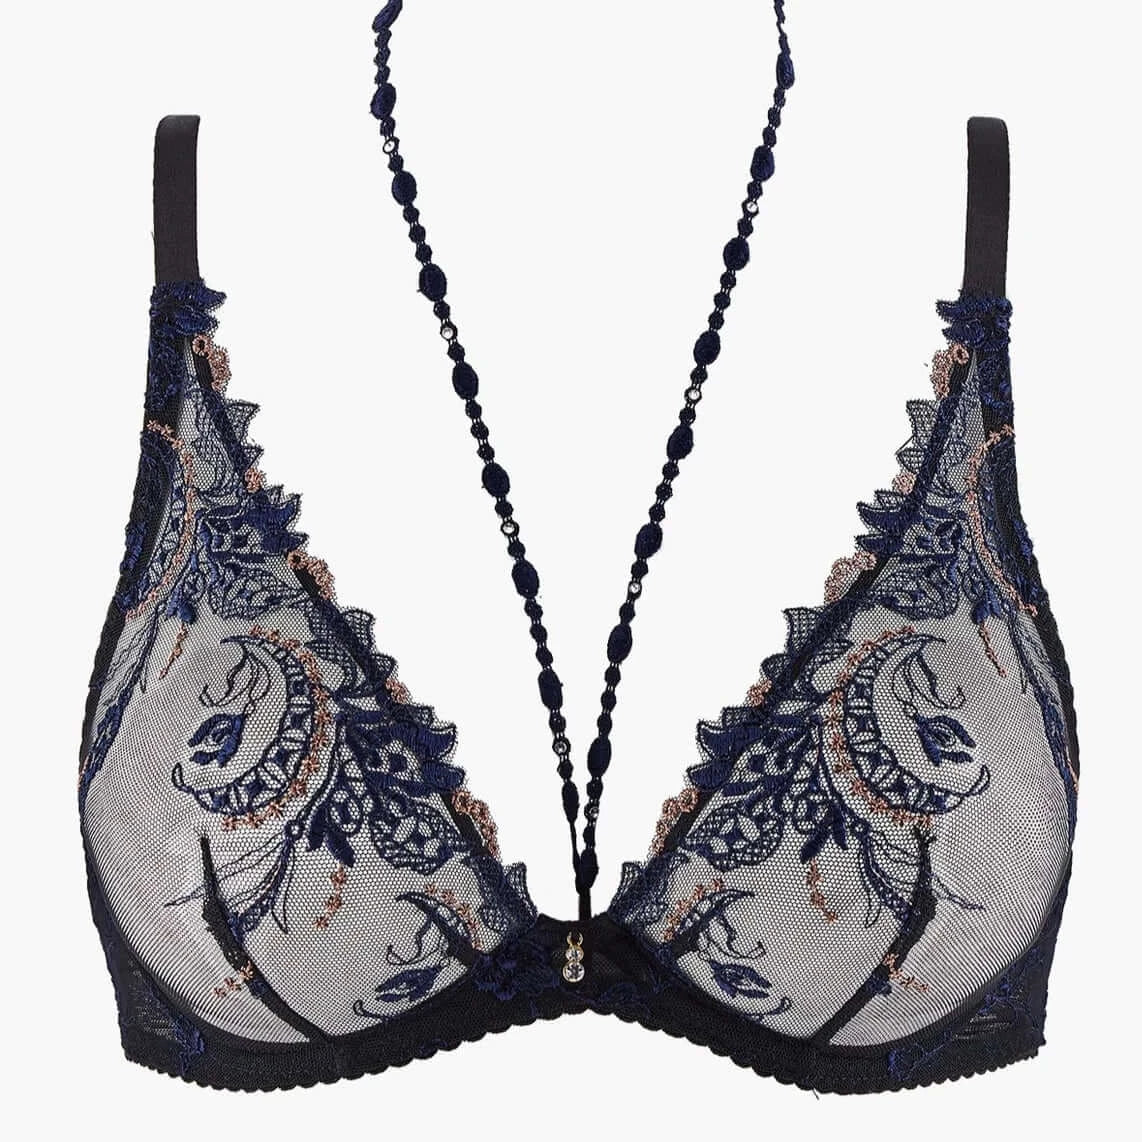 Aubade Amour Precieux UW Triangle Bra in Cosmic Blue UDF12-Bras-Aubade-Cosmic Blue-34-D-Anna Bella Fine Lingerie, Reveal Your Most Gorgeous Self!